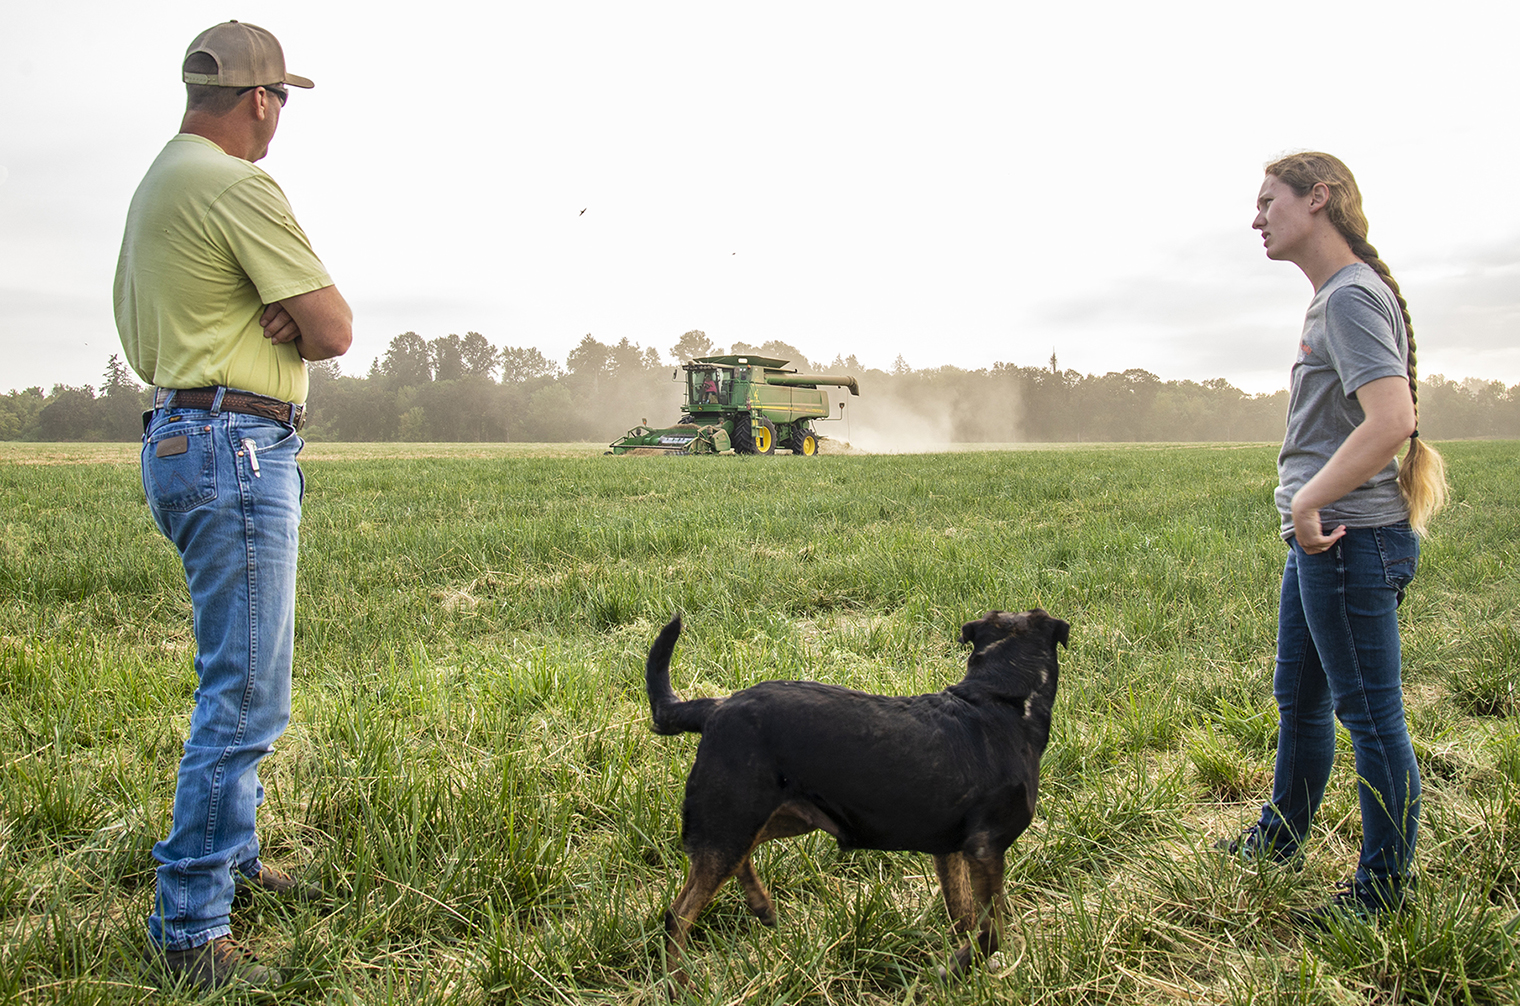 Extension faculty talking in agricultural field with farmer with dog nearby